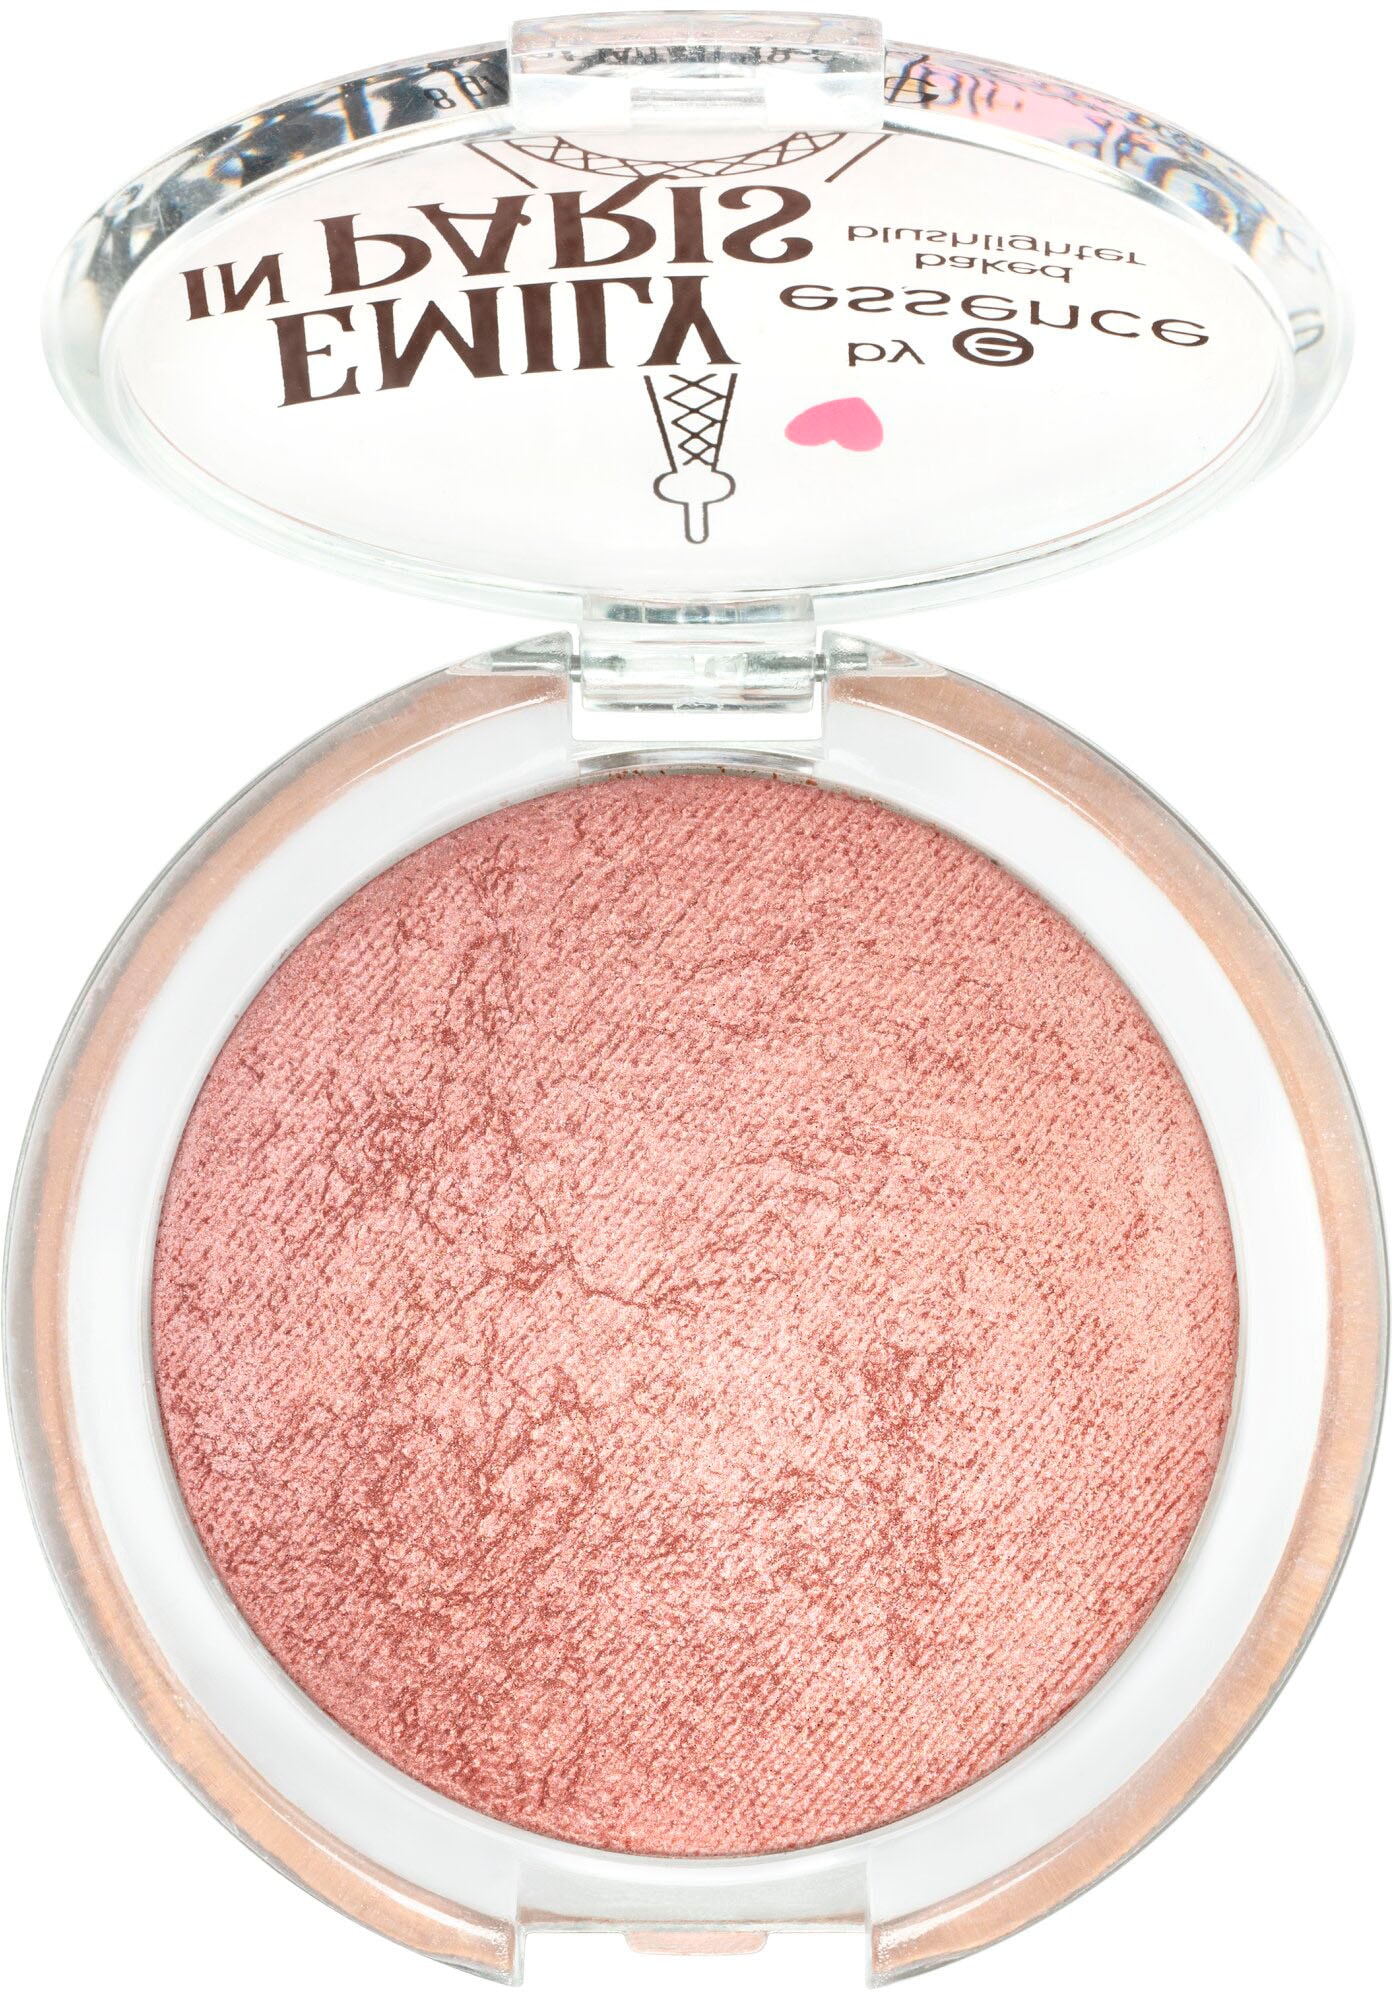 Essence Rouge bei IN blushlighter« PARIS online baked essence by »EMILY